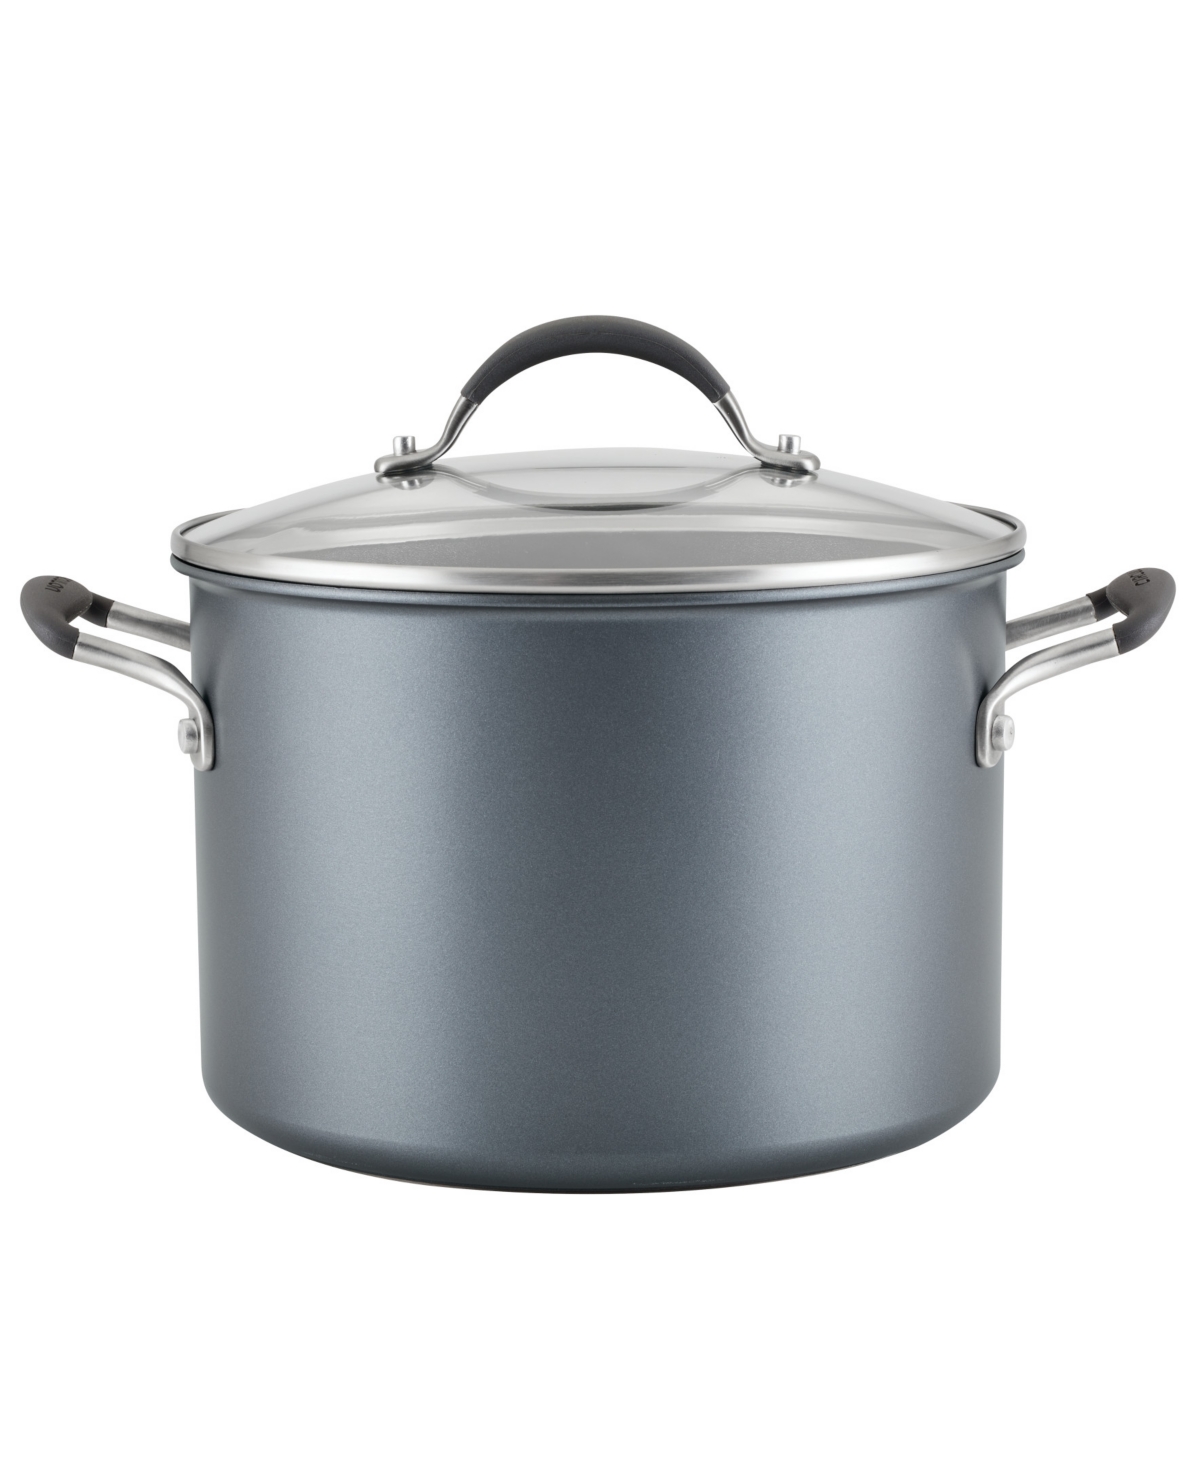 Circulon A1 Series With Scratchdefense Technology Aluminum 8-quart Nonstick Induction Stockpot With Lid In Graphite